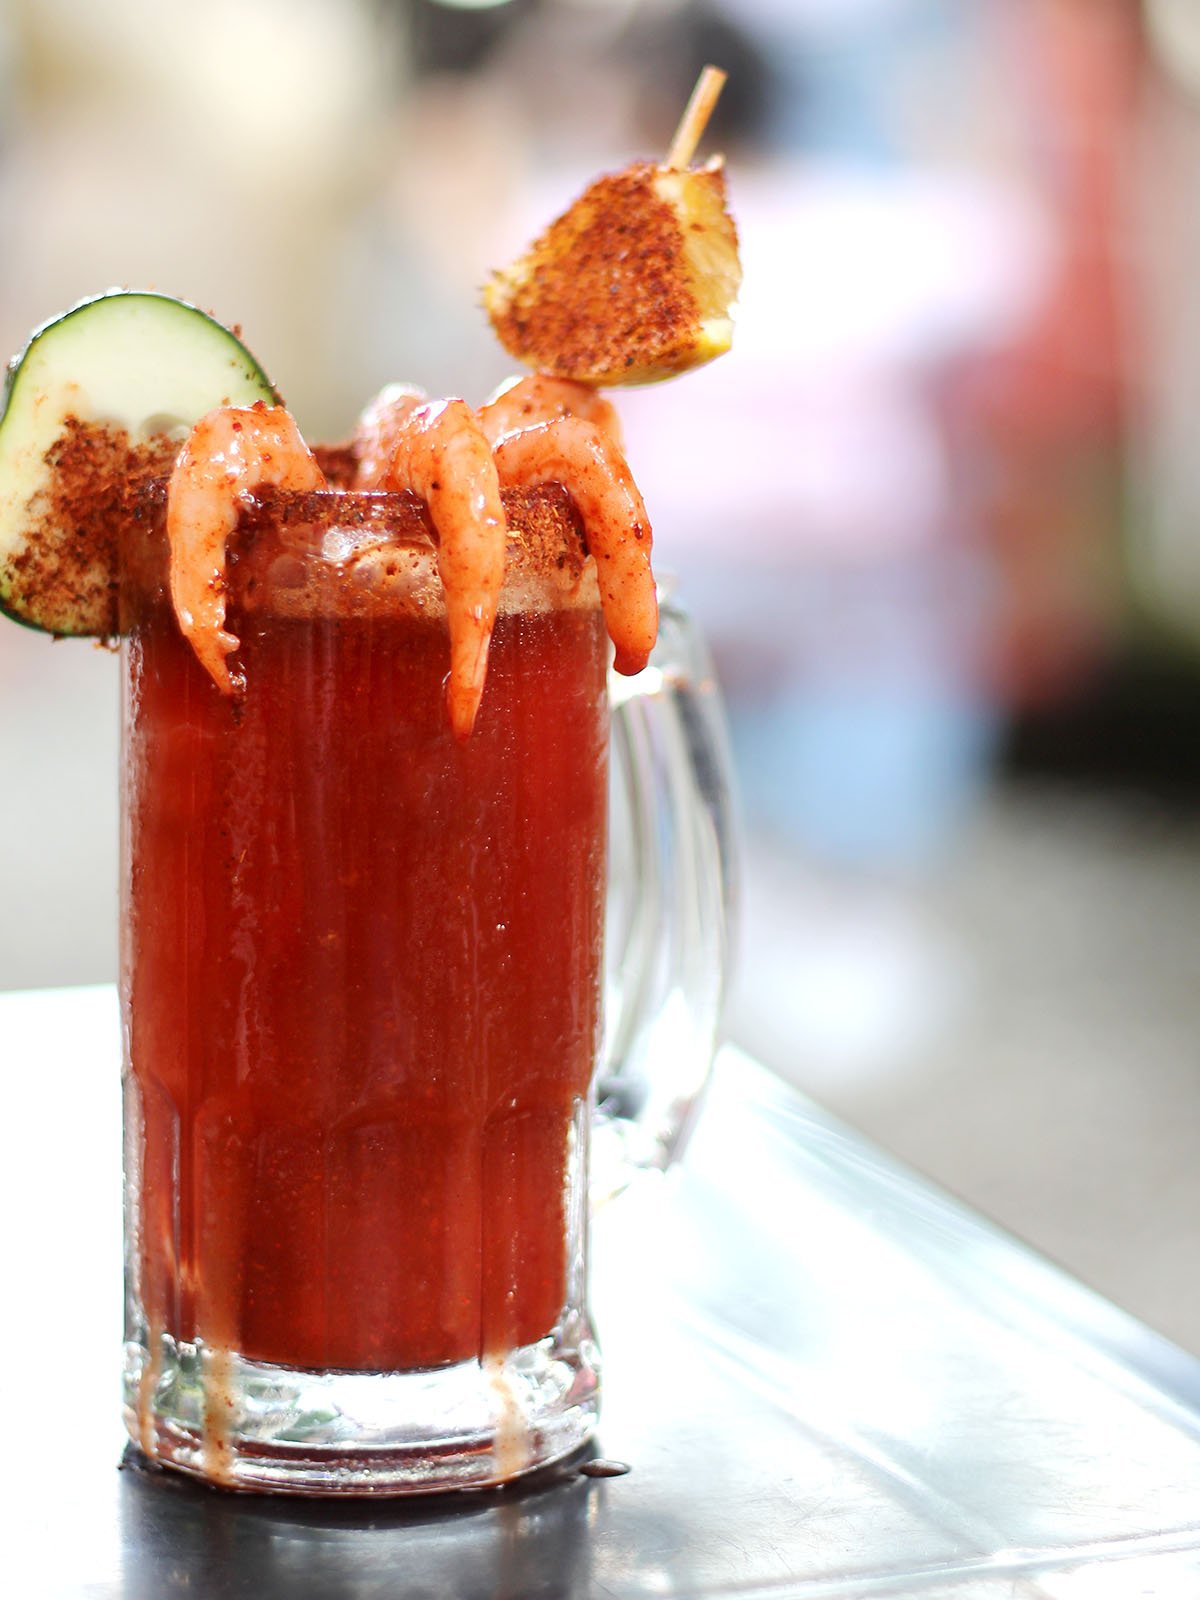 Micheladas served on an outdoor table, it is a Mexican alcoholic drink that is prepared by mixing beer, lemon juice, chili, salt and shrimp decorated with orange slices.